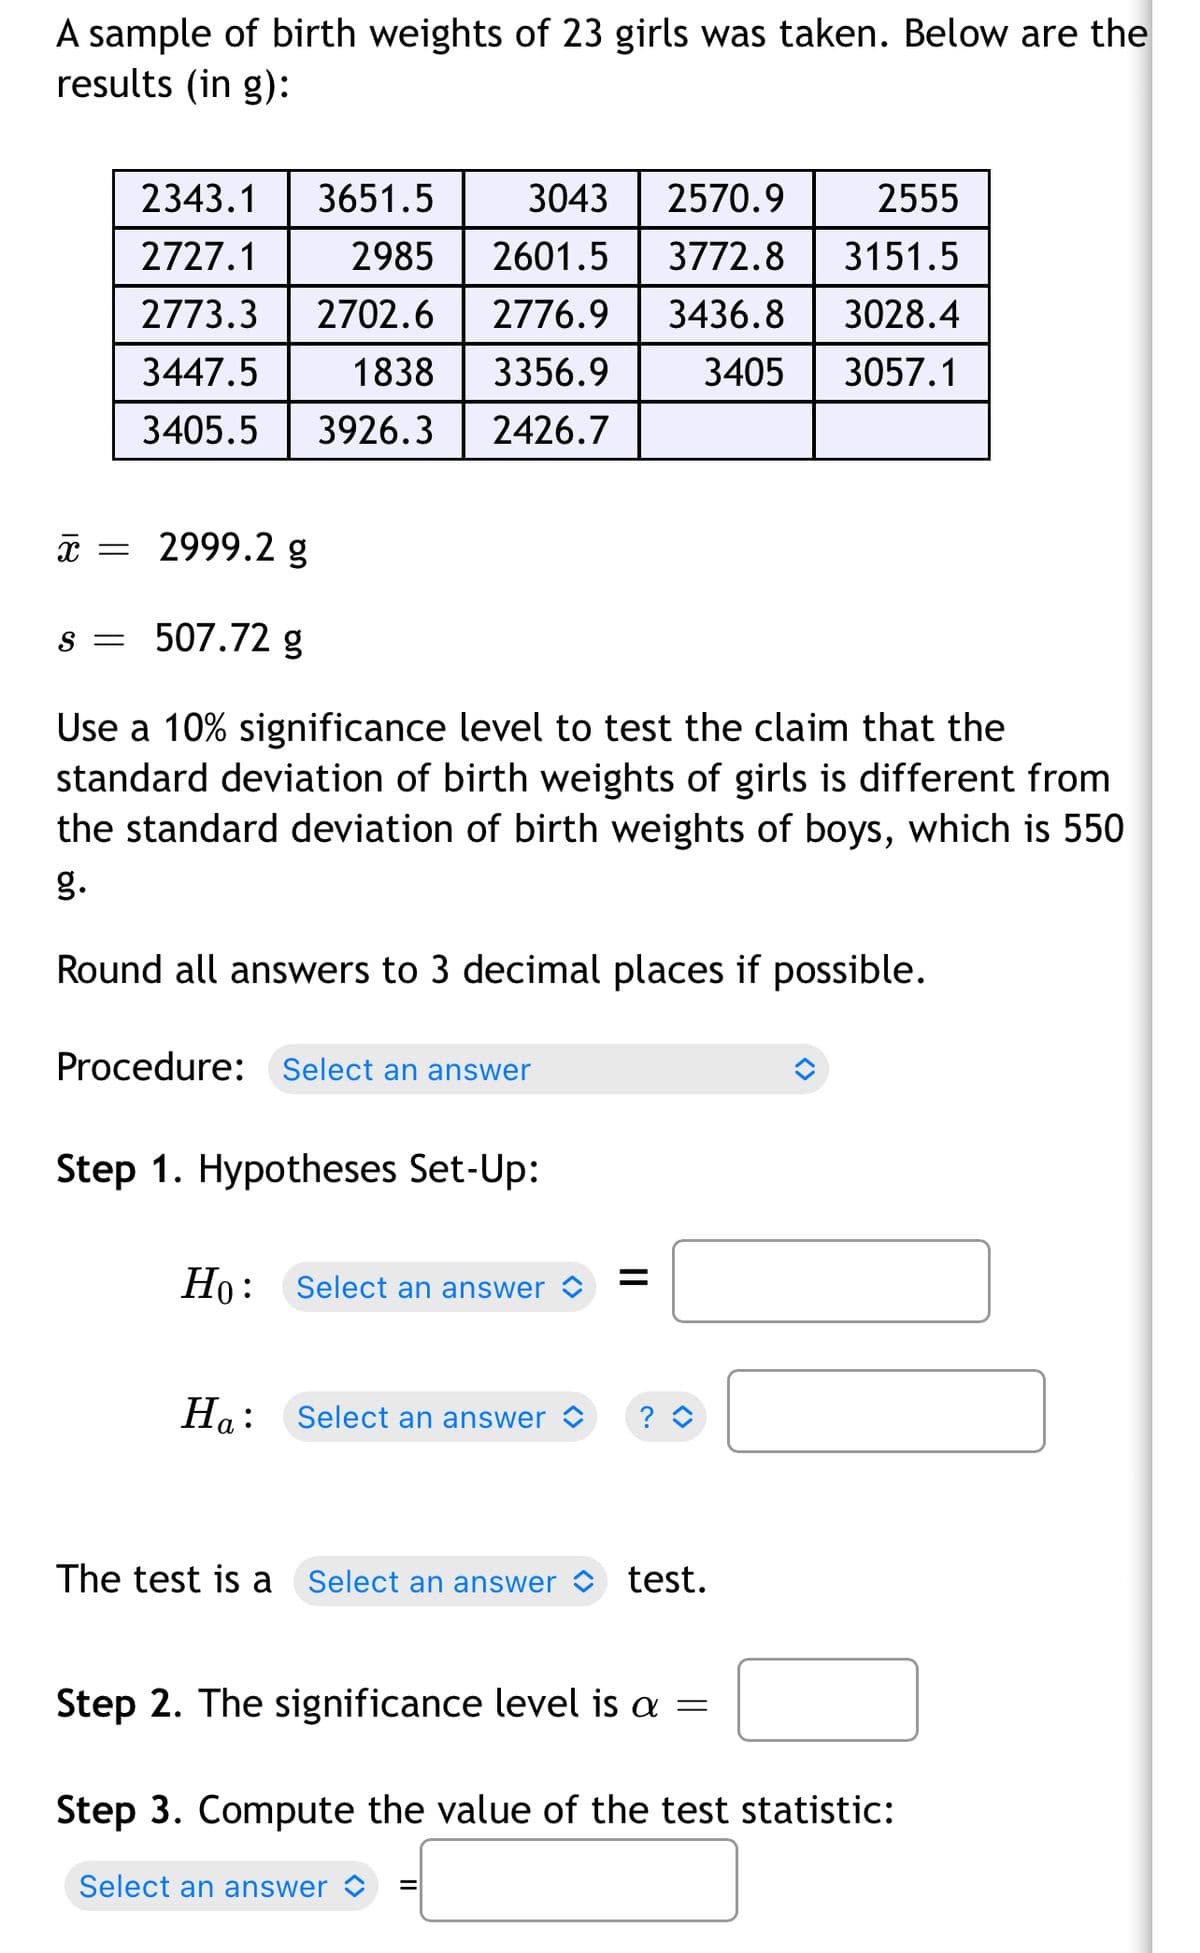 A sample of birth weights of 23 girls was taken. Below are the
results (in g):
2343.1
3651.5
3043
2570.9
2555
2727.1
2985
2601.5
3772.8
3151.5
2773.3
2702.6
2776.9
3436.8
3028.4
3447.5
1838
3356.9
3405
3057.1
3405.5
3926.3
2426.7
x = 2999.2 g
s = 507.72 g
Use a 10% significance level to test the claim that the
standard deviation of birth weights of girls is different from
the standard deviation of birth weights of boys, which is 550
g.
Round all answers to 3 decimal places if possible.
Procedure: Select an answer
Step 1. Hypotheses Set-Up:
Но:
Ho: Select an answer
На:
Select an answer
The test is
Select an answer test.
Step 2. The significance level is a =
Step 3. Compute the value of the test statistic:
Select an answer <
II
